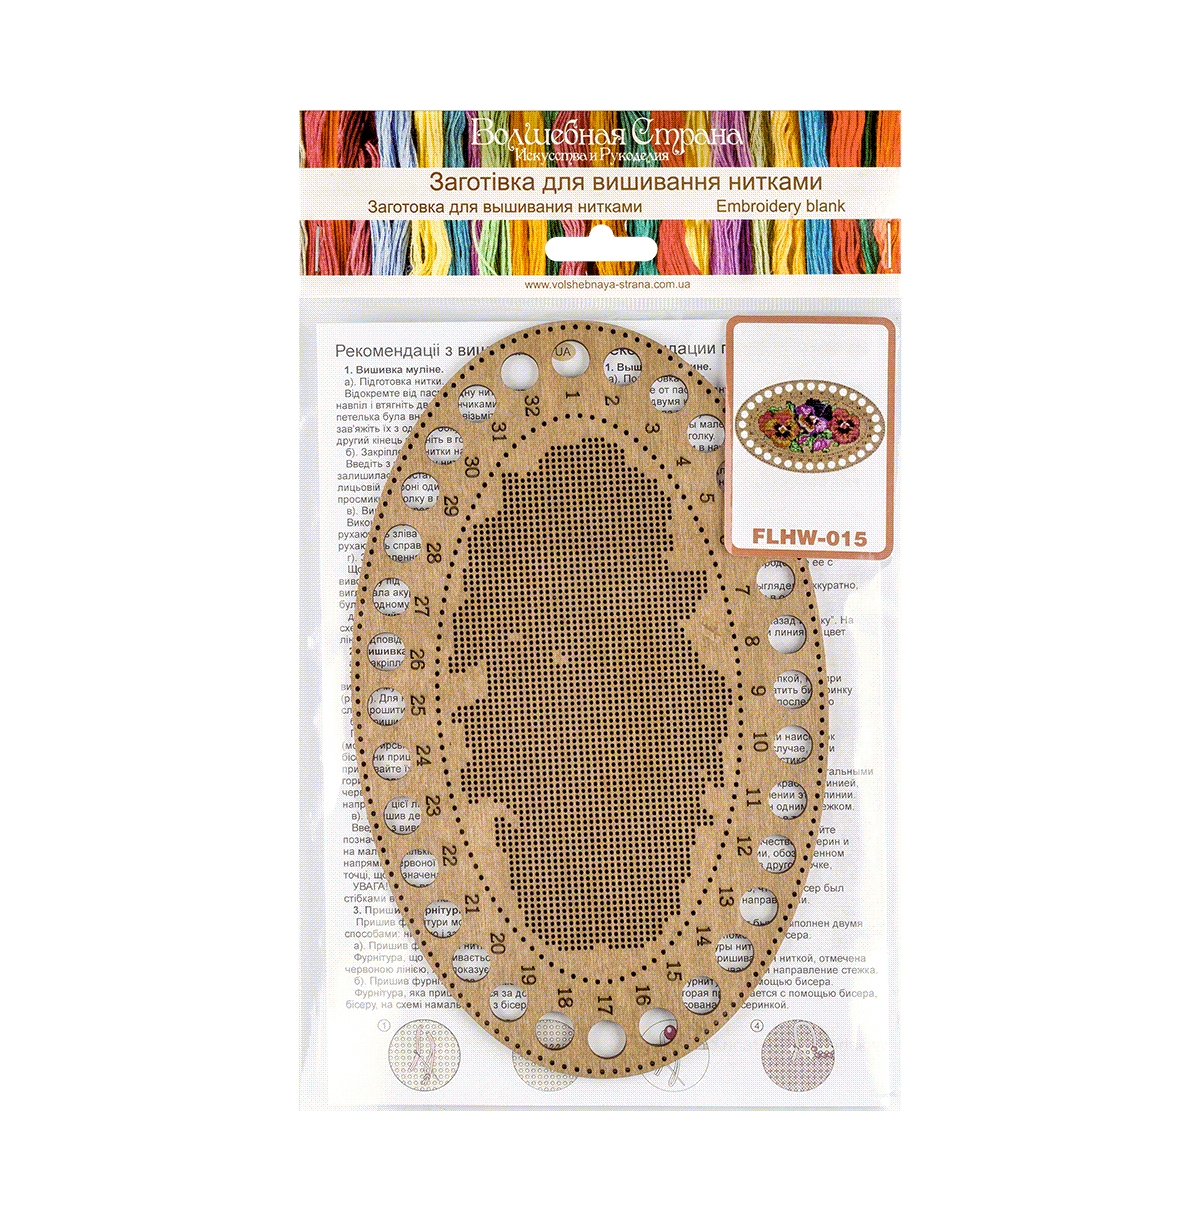 Blank for embroidery with thread on wood Kit Flhw-015 - Assorted Pre-pack (See Table